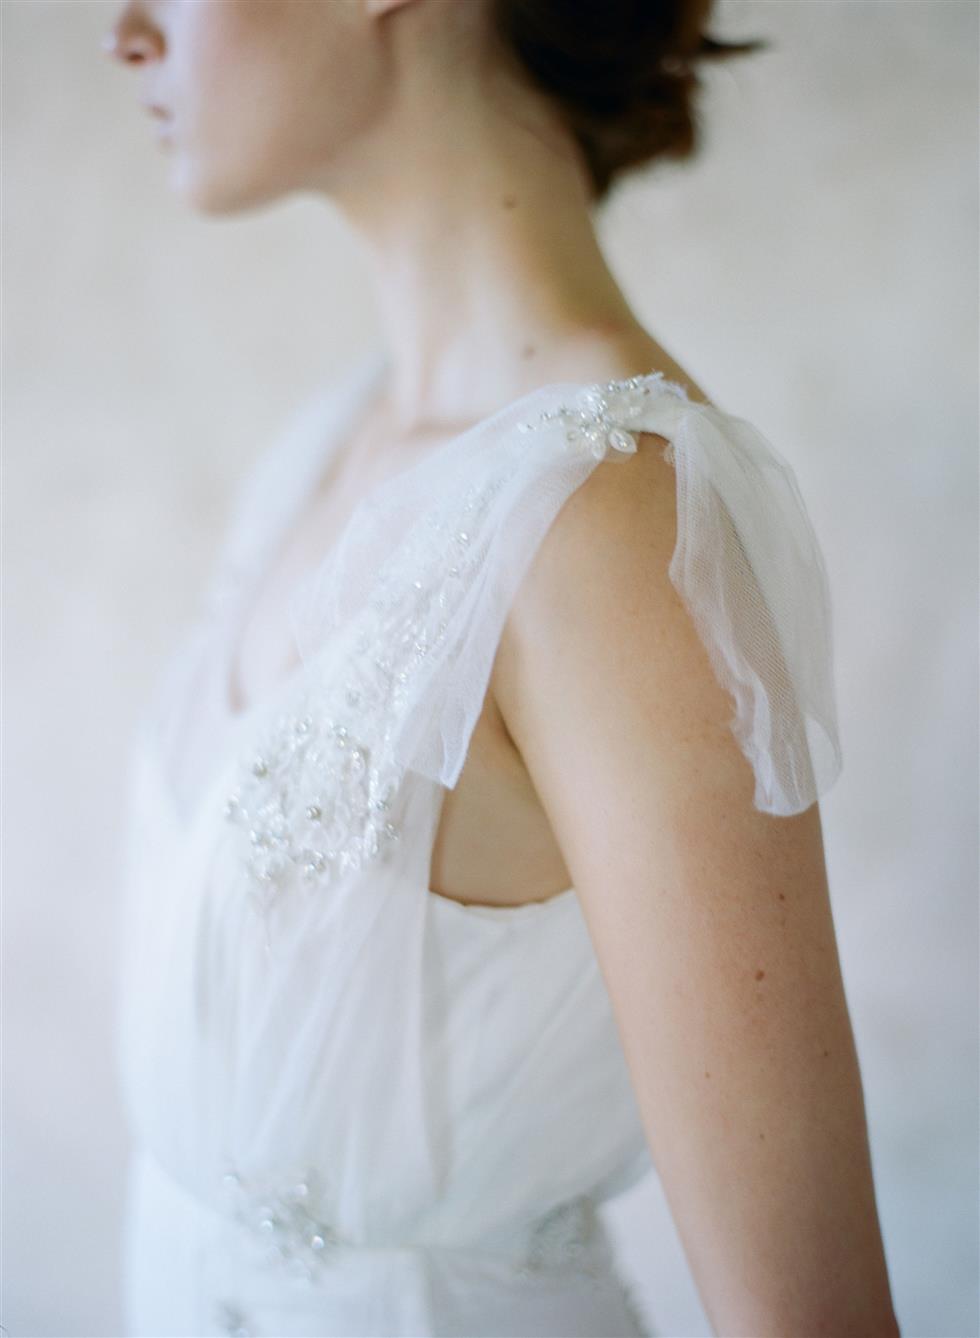 The Beautiful 2015 Wedding Dress Collection from Myra Callan for Twigs & Honey